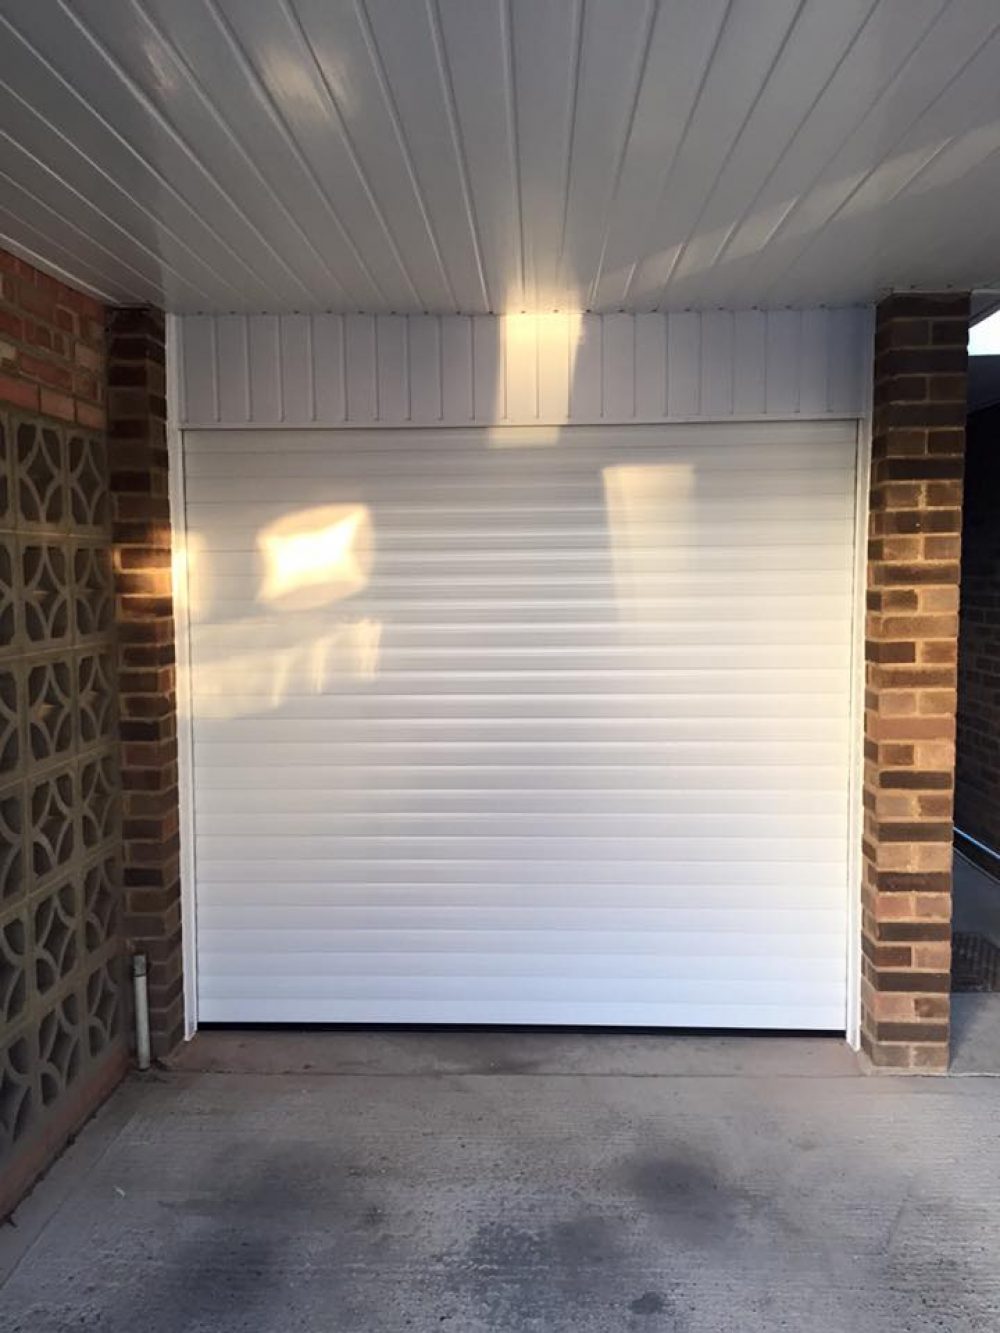 SWS Seceuroglide Roller Garage Door fitted by Shutter Spec Security, Thame, Oxfordshire